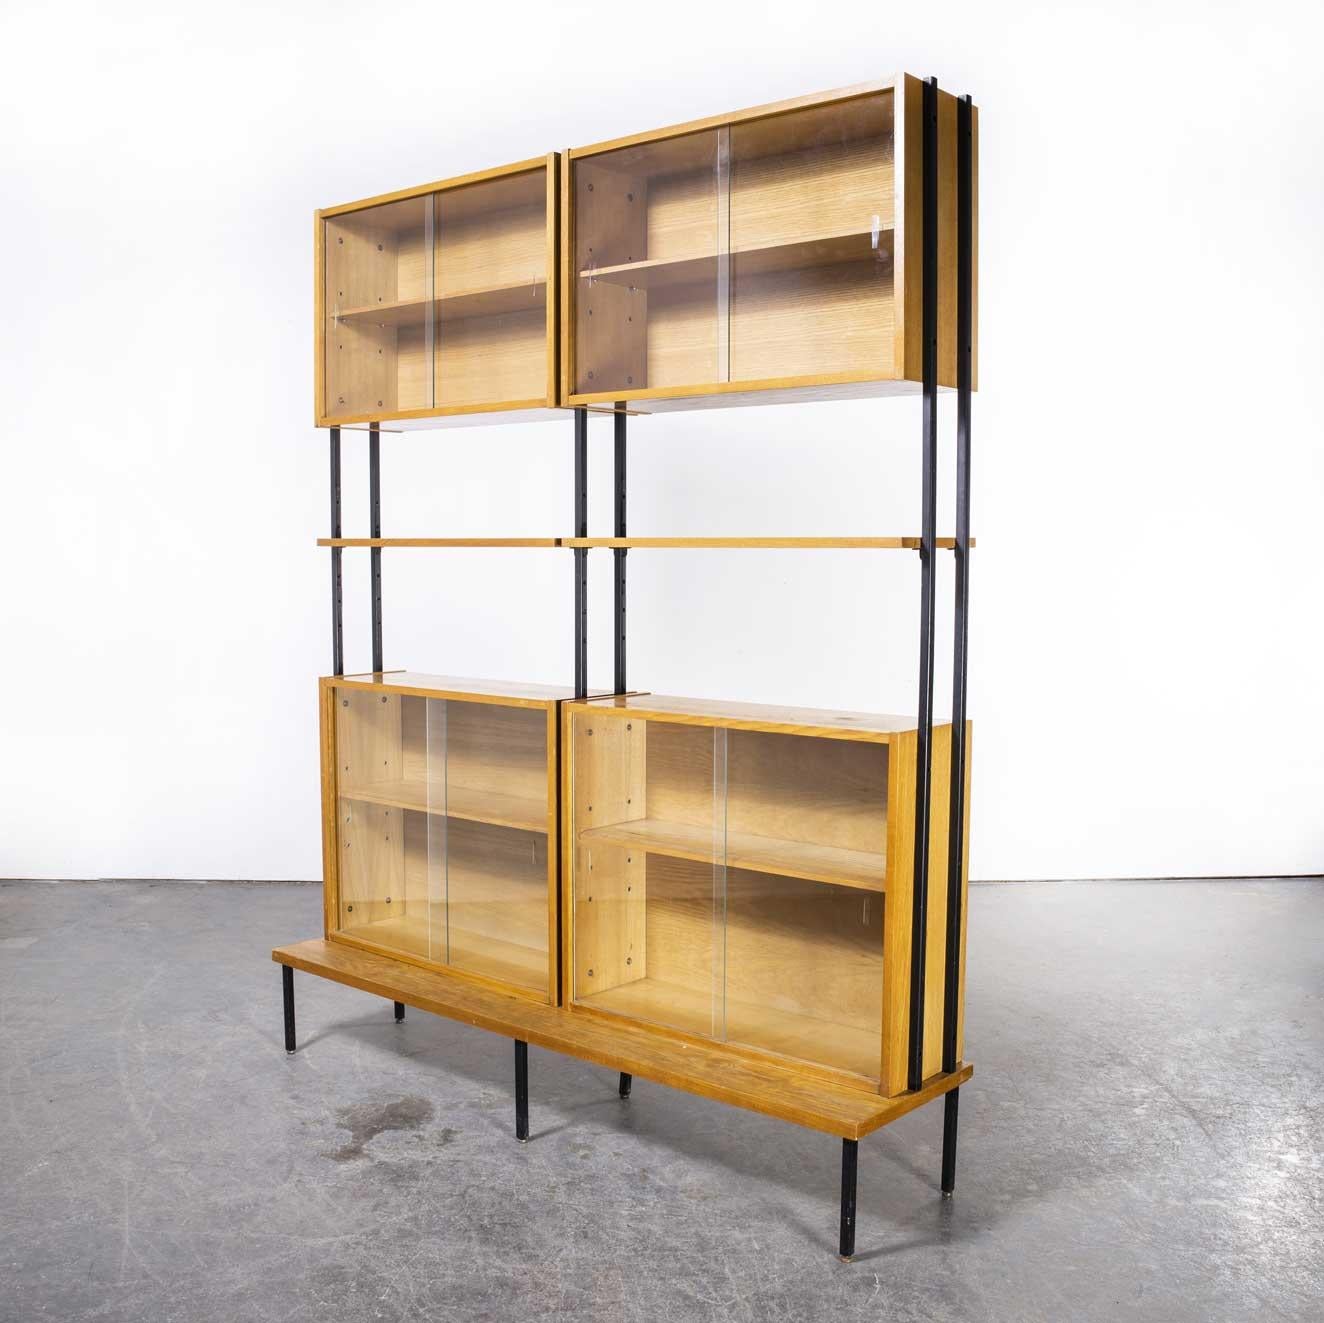 1970’s large double mid century open bookcase – glass fronted
1970’s large double mid century open bookcase – glass fronted. Beautiful simple and classic mid century shelving unit sourced in the Czech Republic. The frame is sapele and birch wood